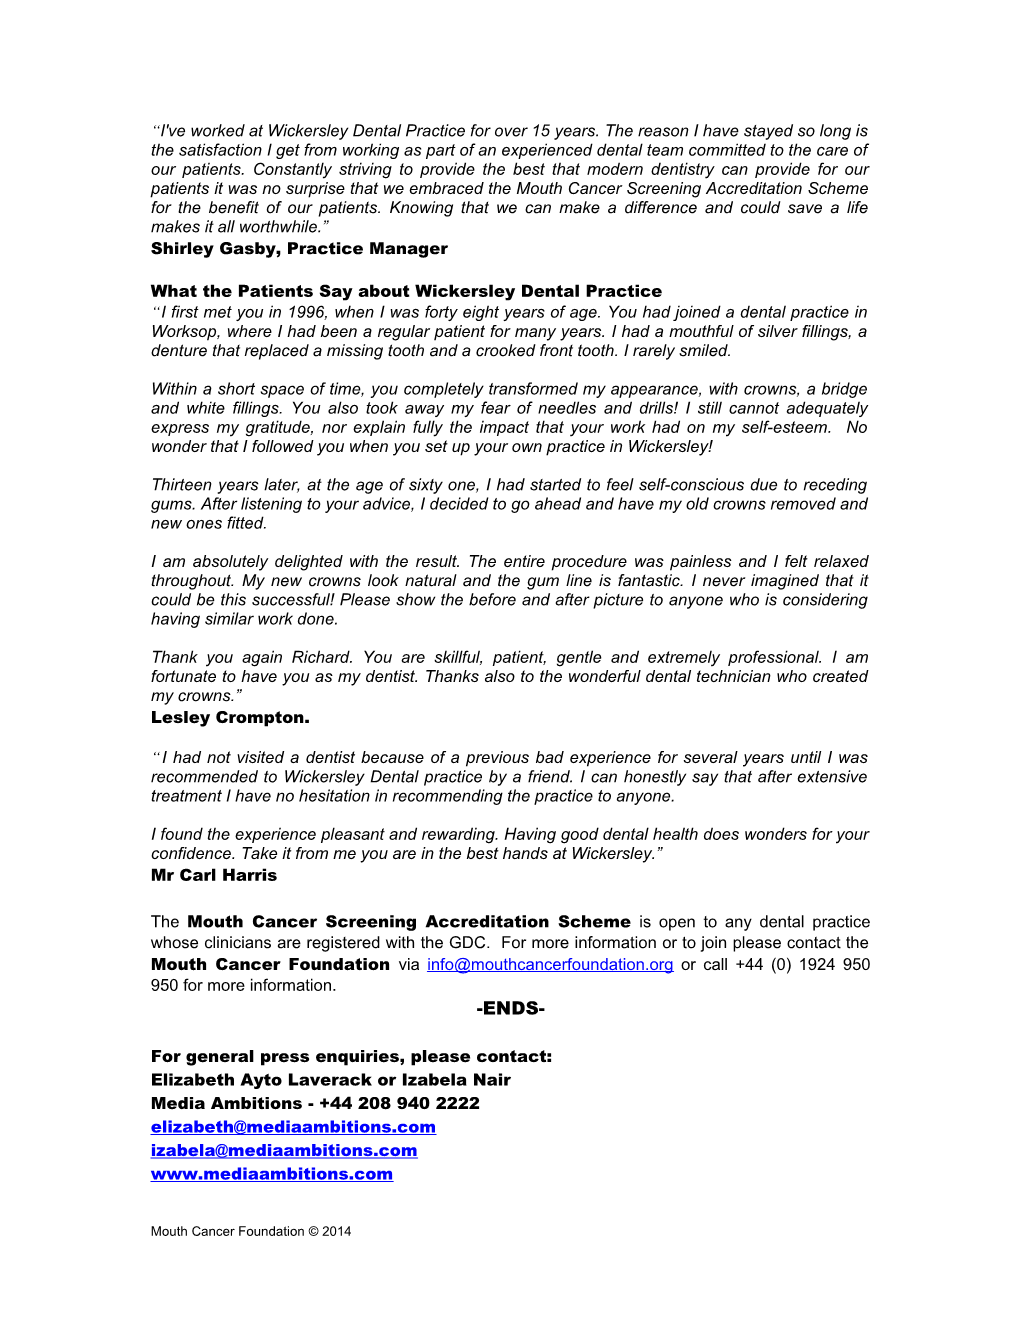 Mouth Cancer Screening Accreditiation Scheme Practice of the Month Wickersley Dental Practice